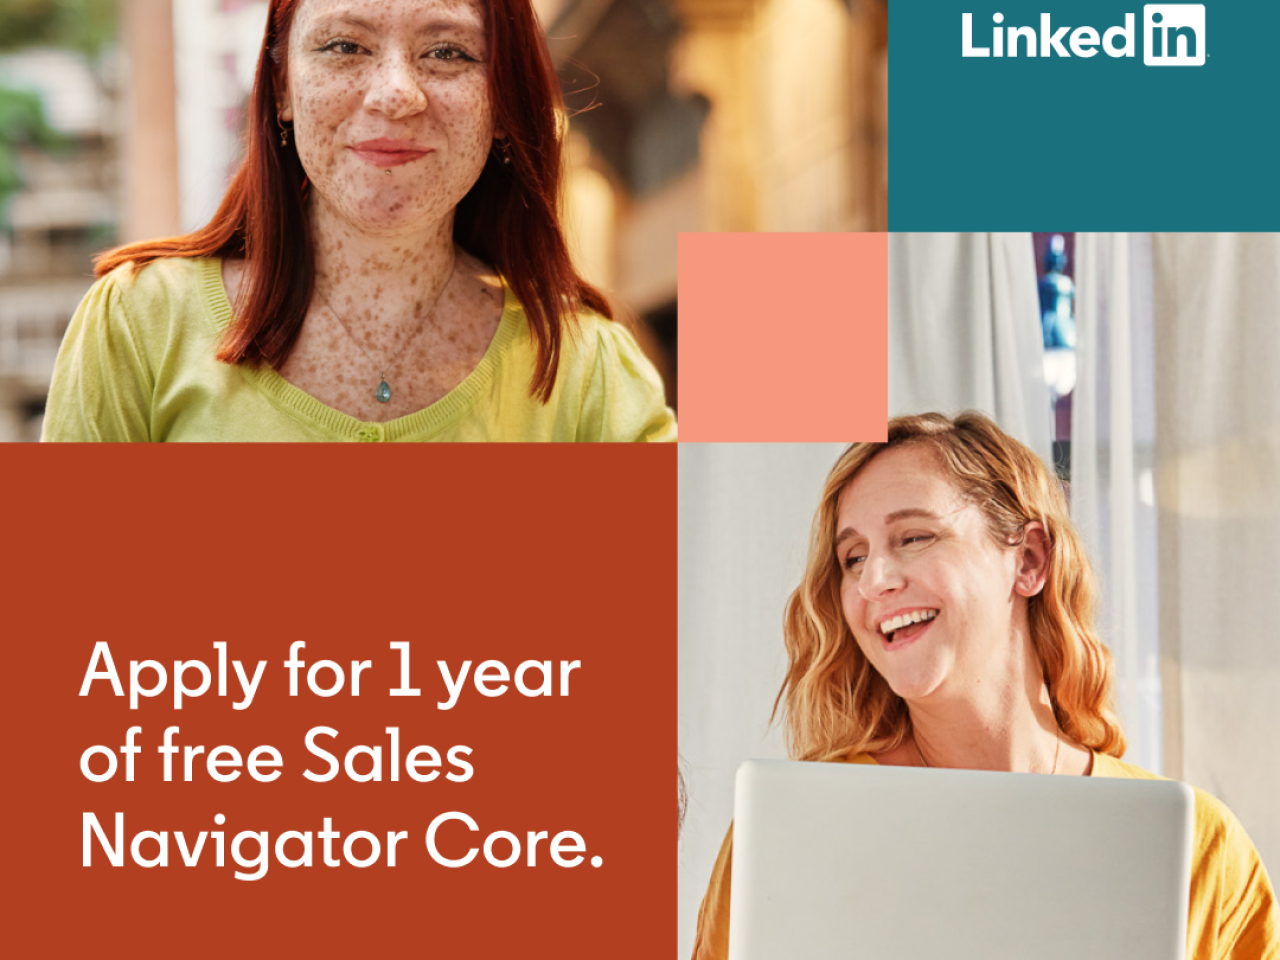 "Apply for 1 year of free Salves Navigator Core." with image of two people smiling